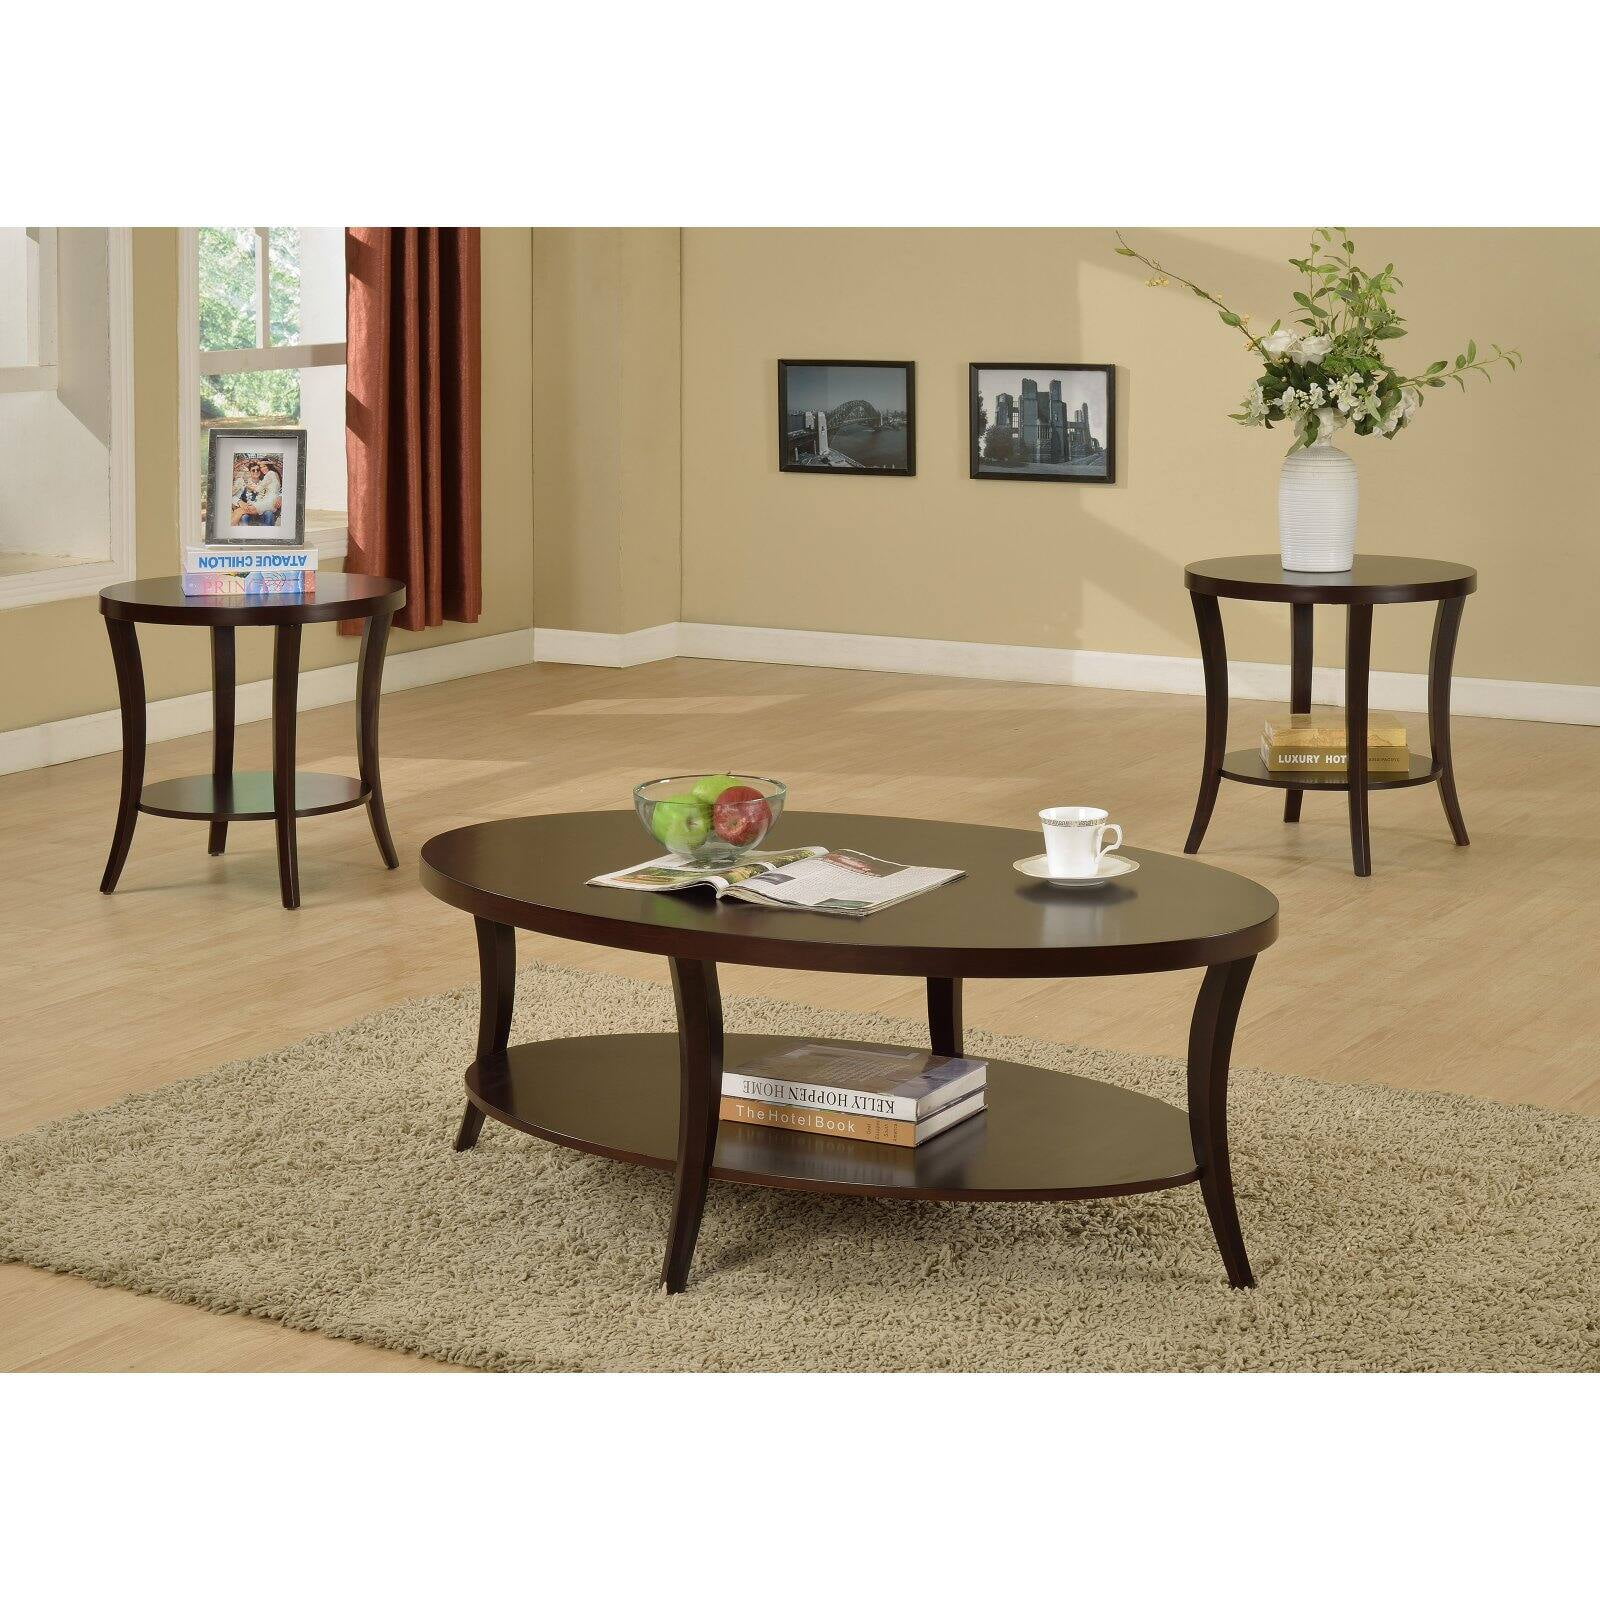 Cool pictures of end tables Roundhill Perth 3 Piece Espresso Oval Coffee Table With End Tables Set Walmart Com